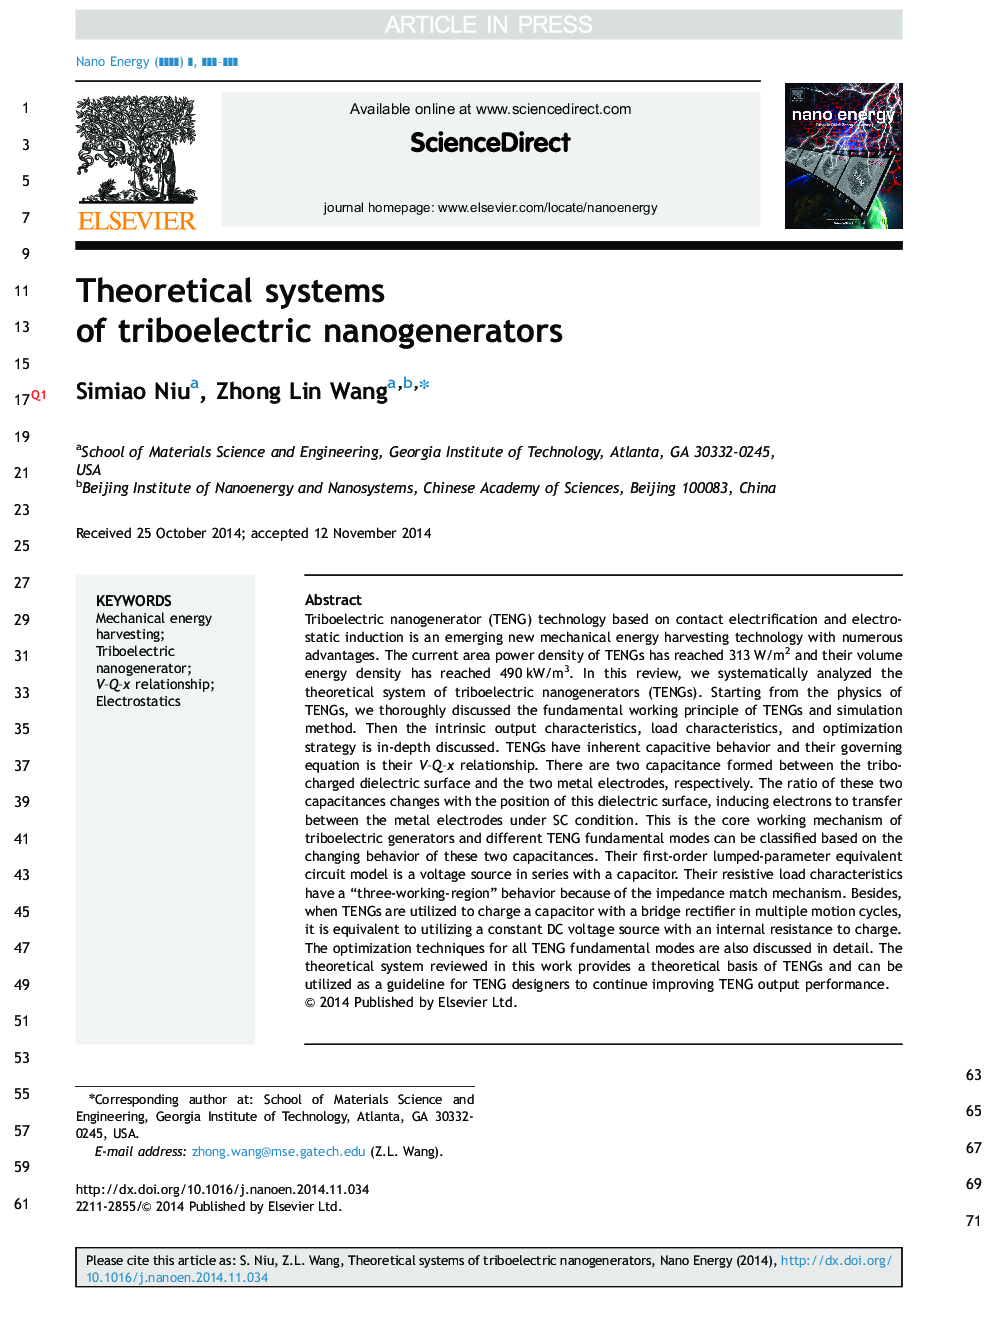 Theoretical systems of triboelectric nanogenerators